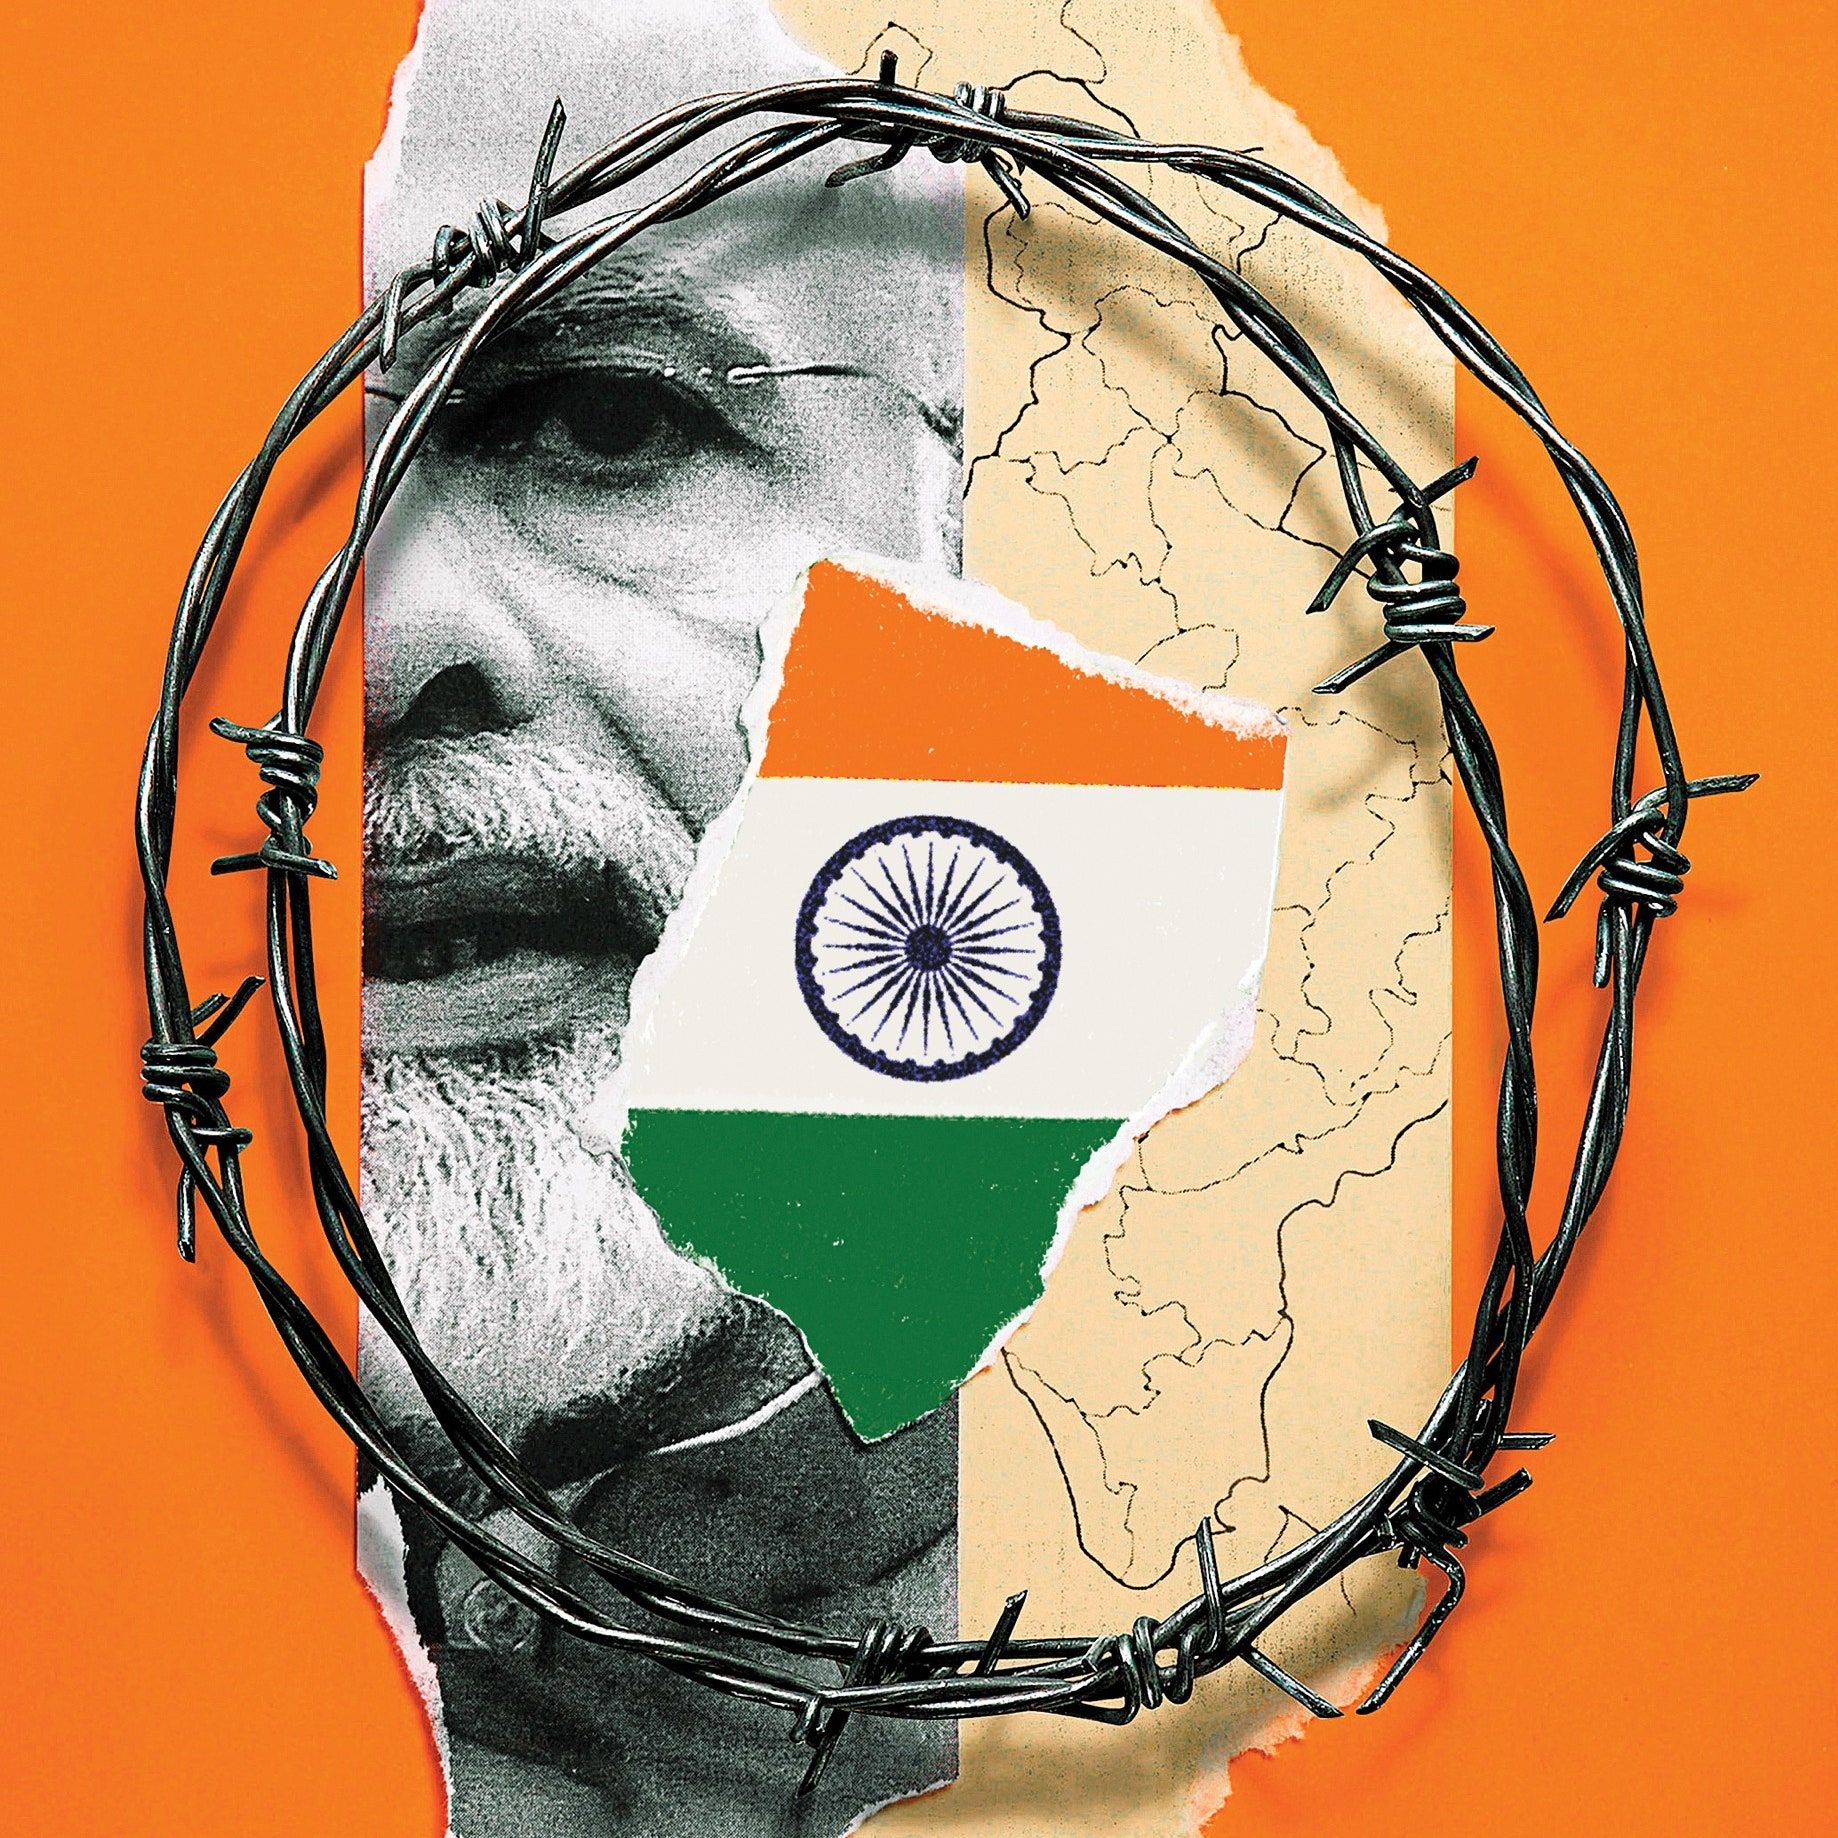 Blood and Soil in Narendra Modi's India. The New Yorker